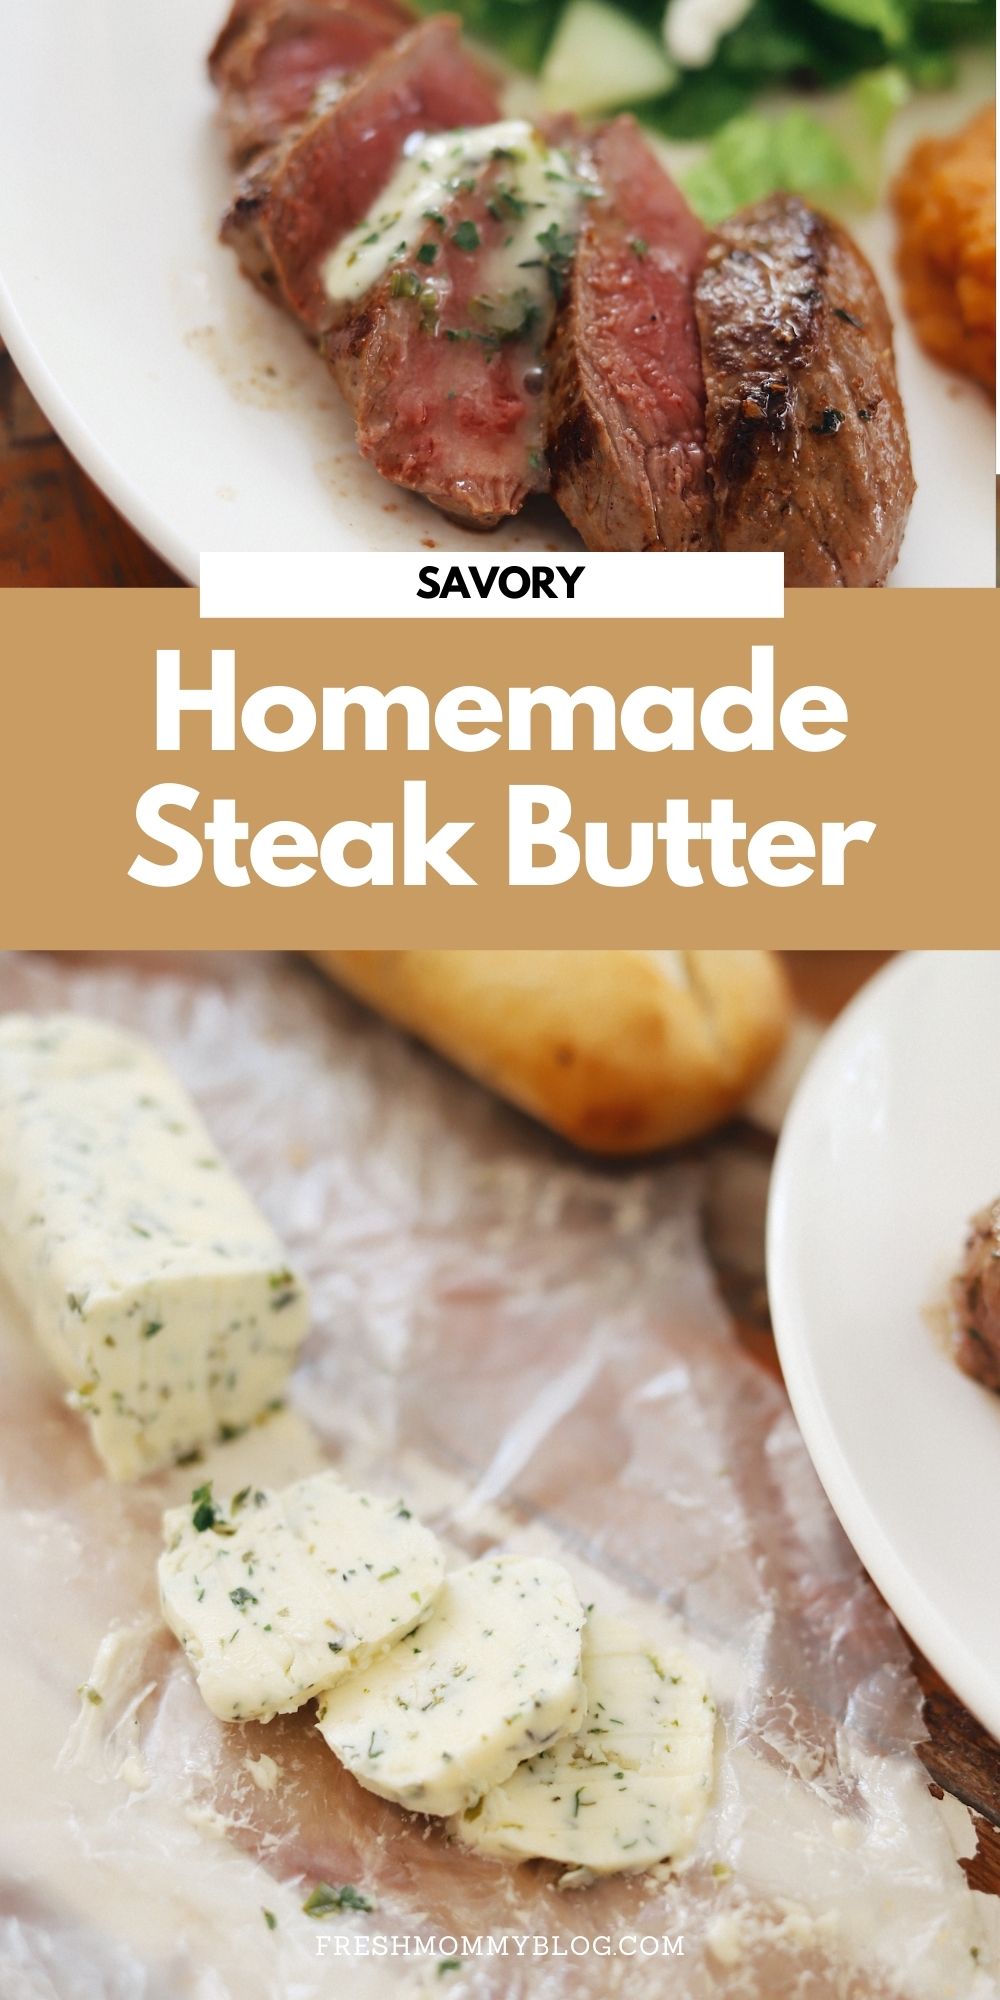 Homemade Steak Butter: How to Make an Easy Steakhouse Herb Butter for Steak |Steak Butter by popular Florida lifestyle blog, Fresh Mommy Blog: Pinterest image of slices pieces of steak with melted steak butter on top. 